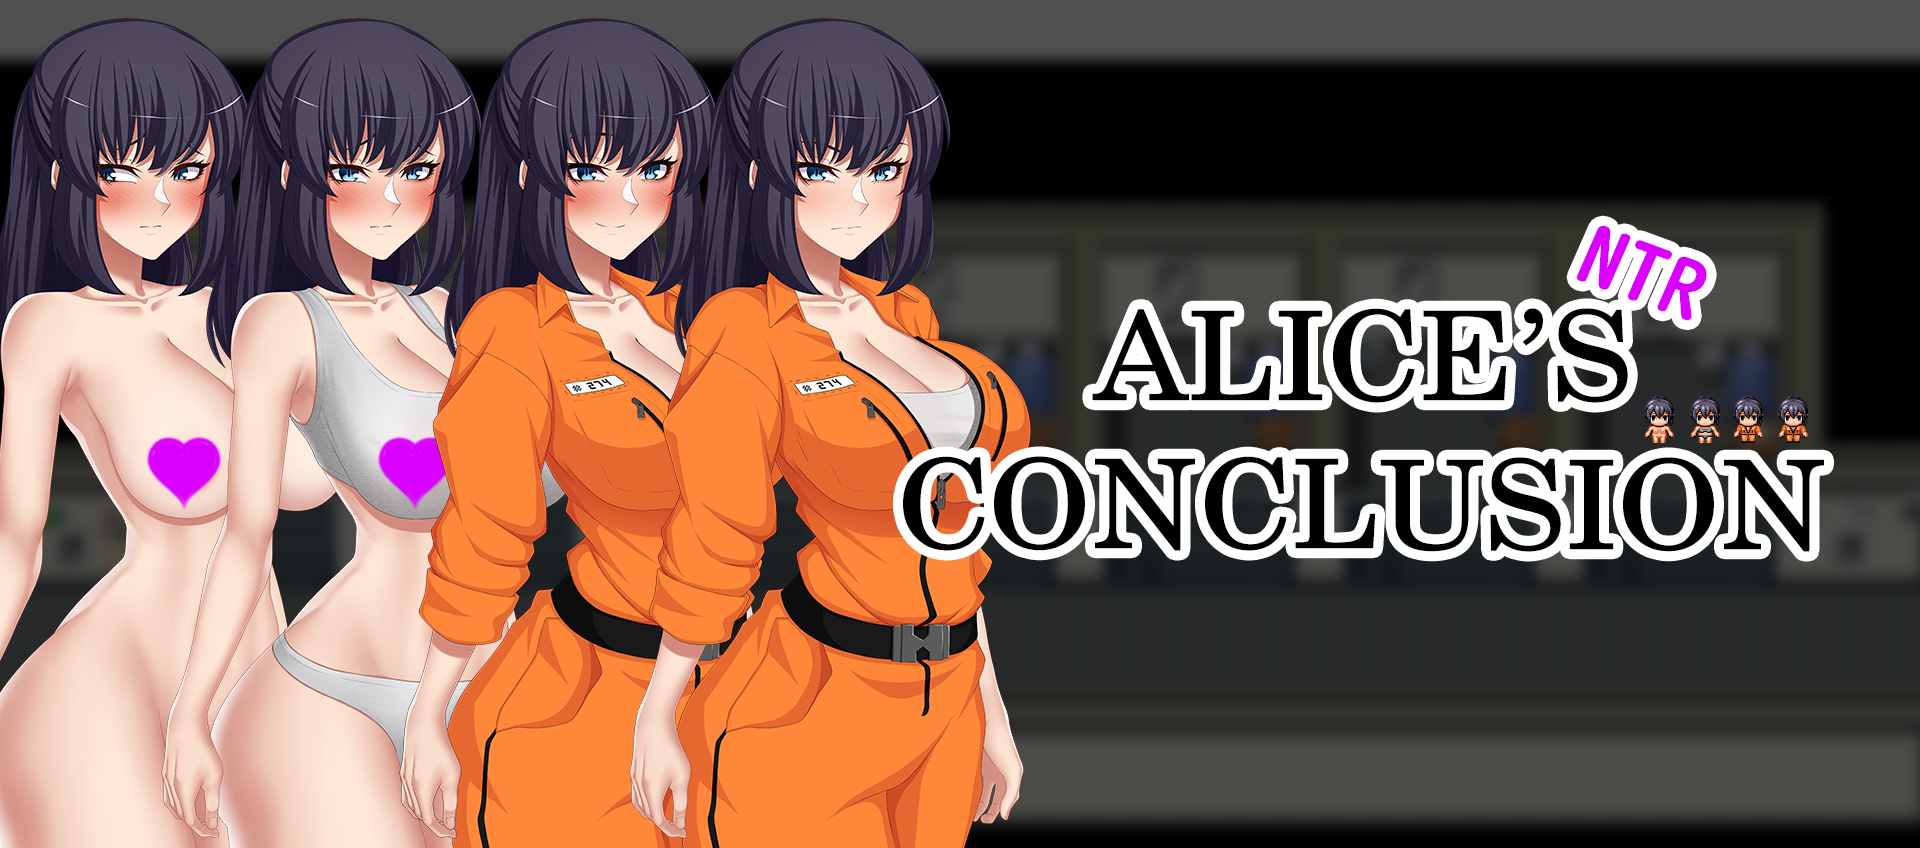 Alice's Conclusion [Hervi] Adult xxx Game Download